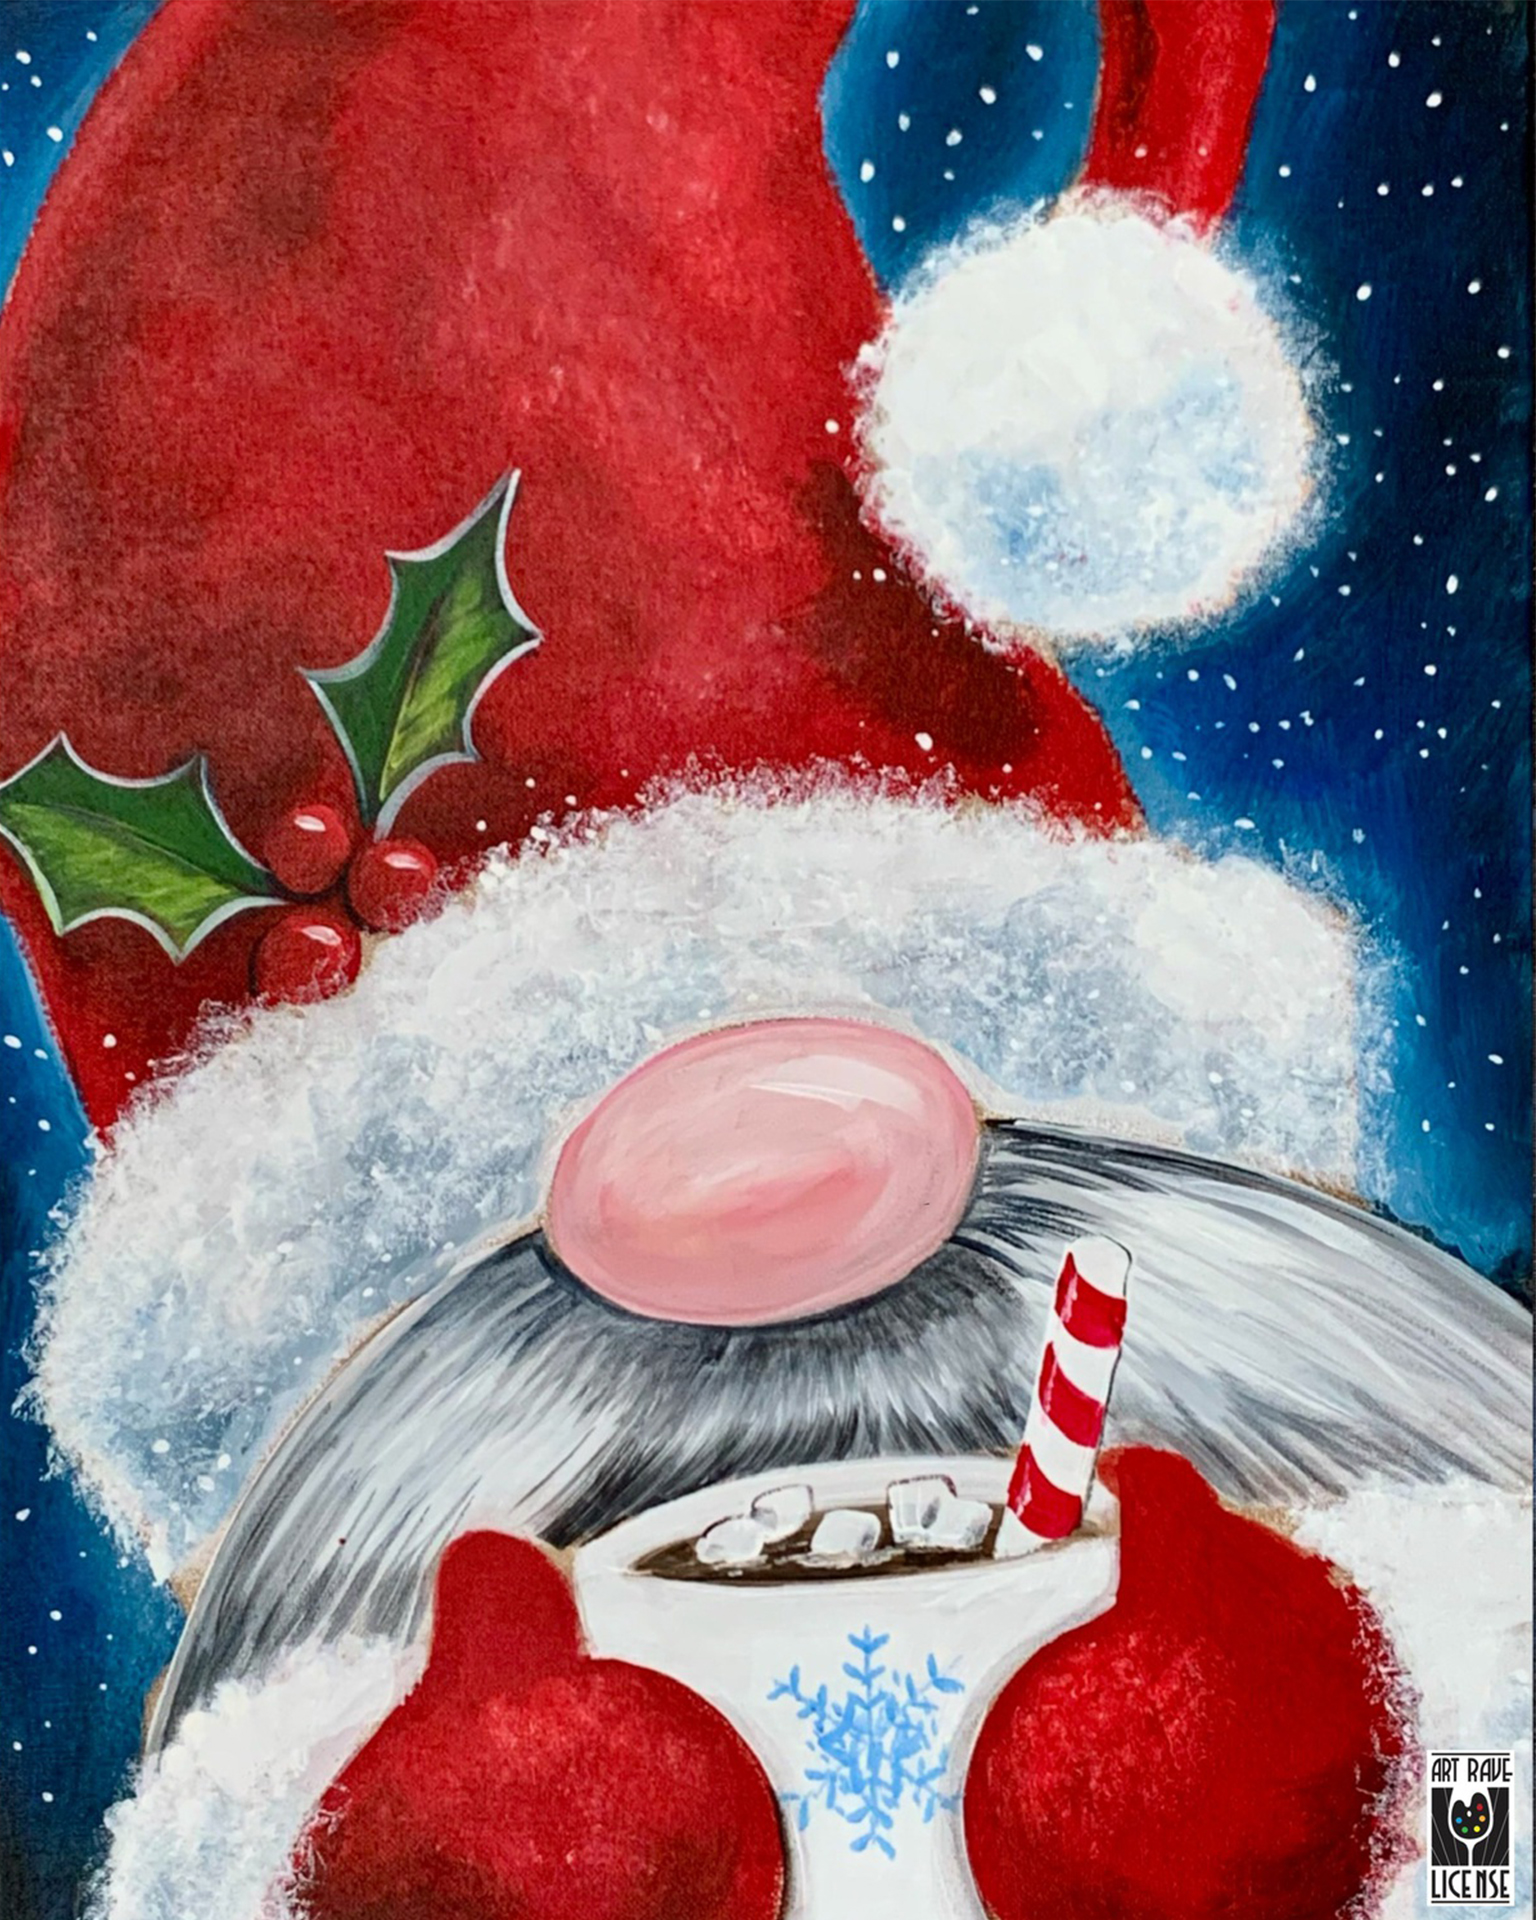 Gnome for the Holidays from uptown paint and sip painting classes in Jupiter FL